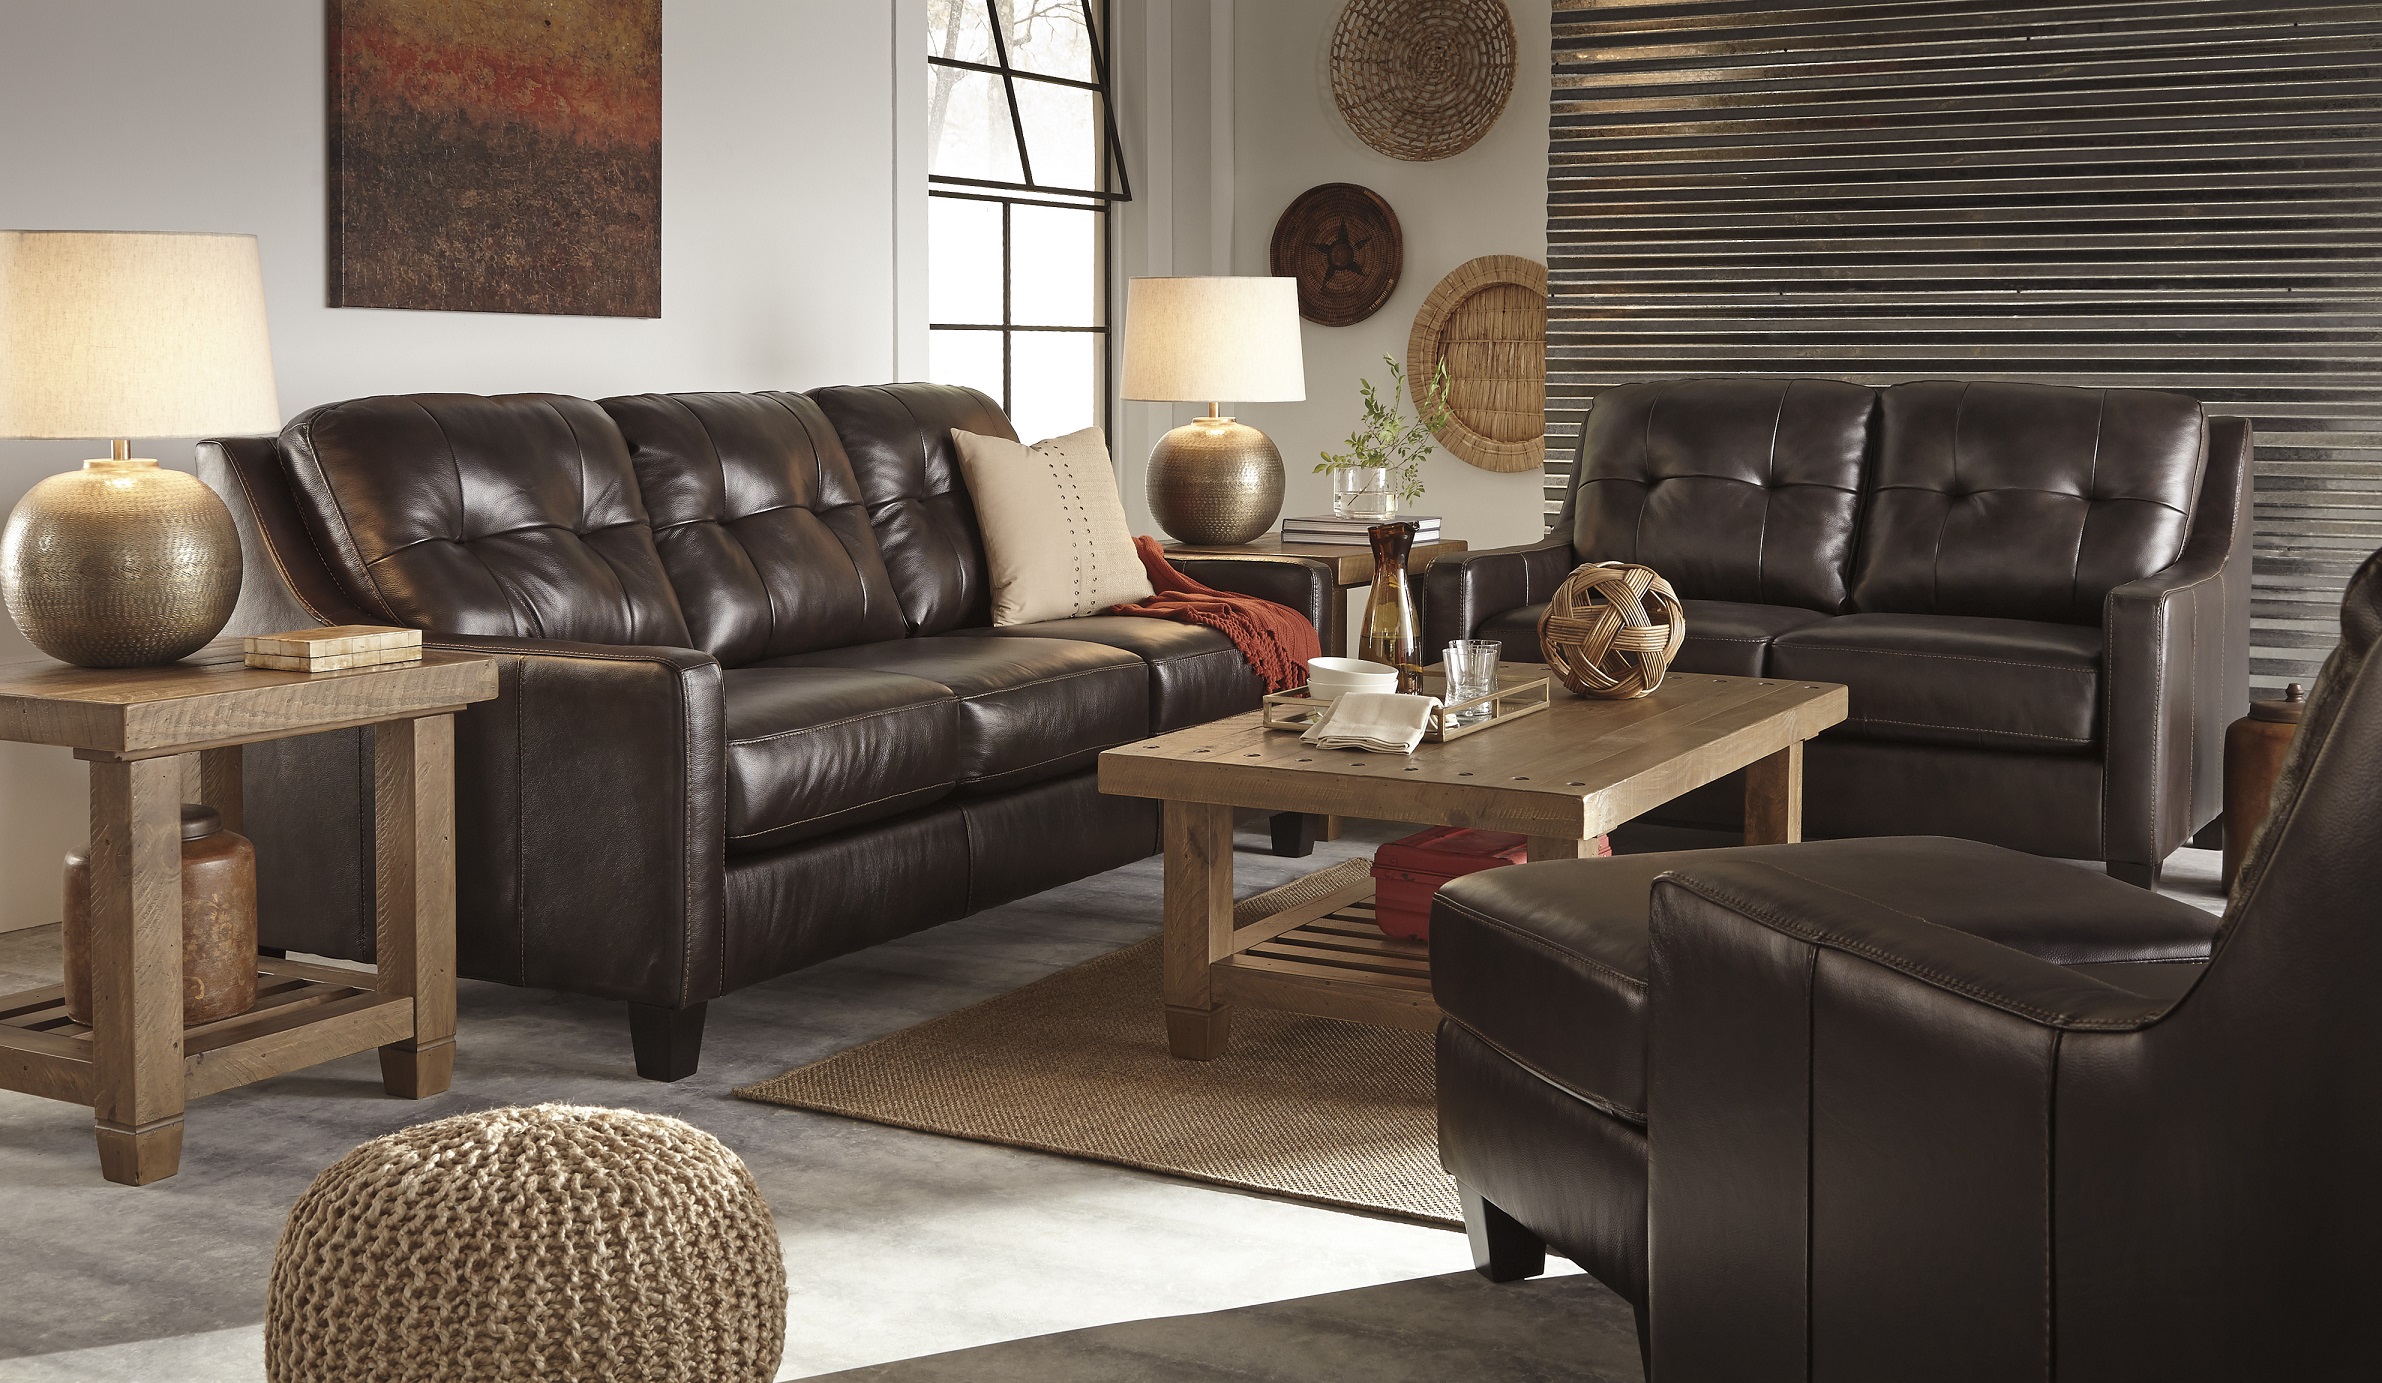 Rustic Leather Hide a way Bed and Sleeper Sofas